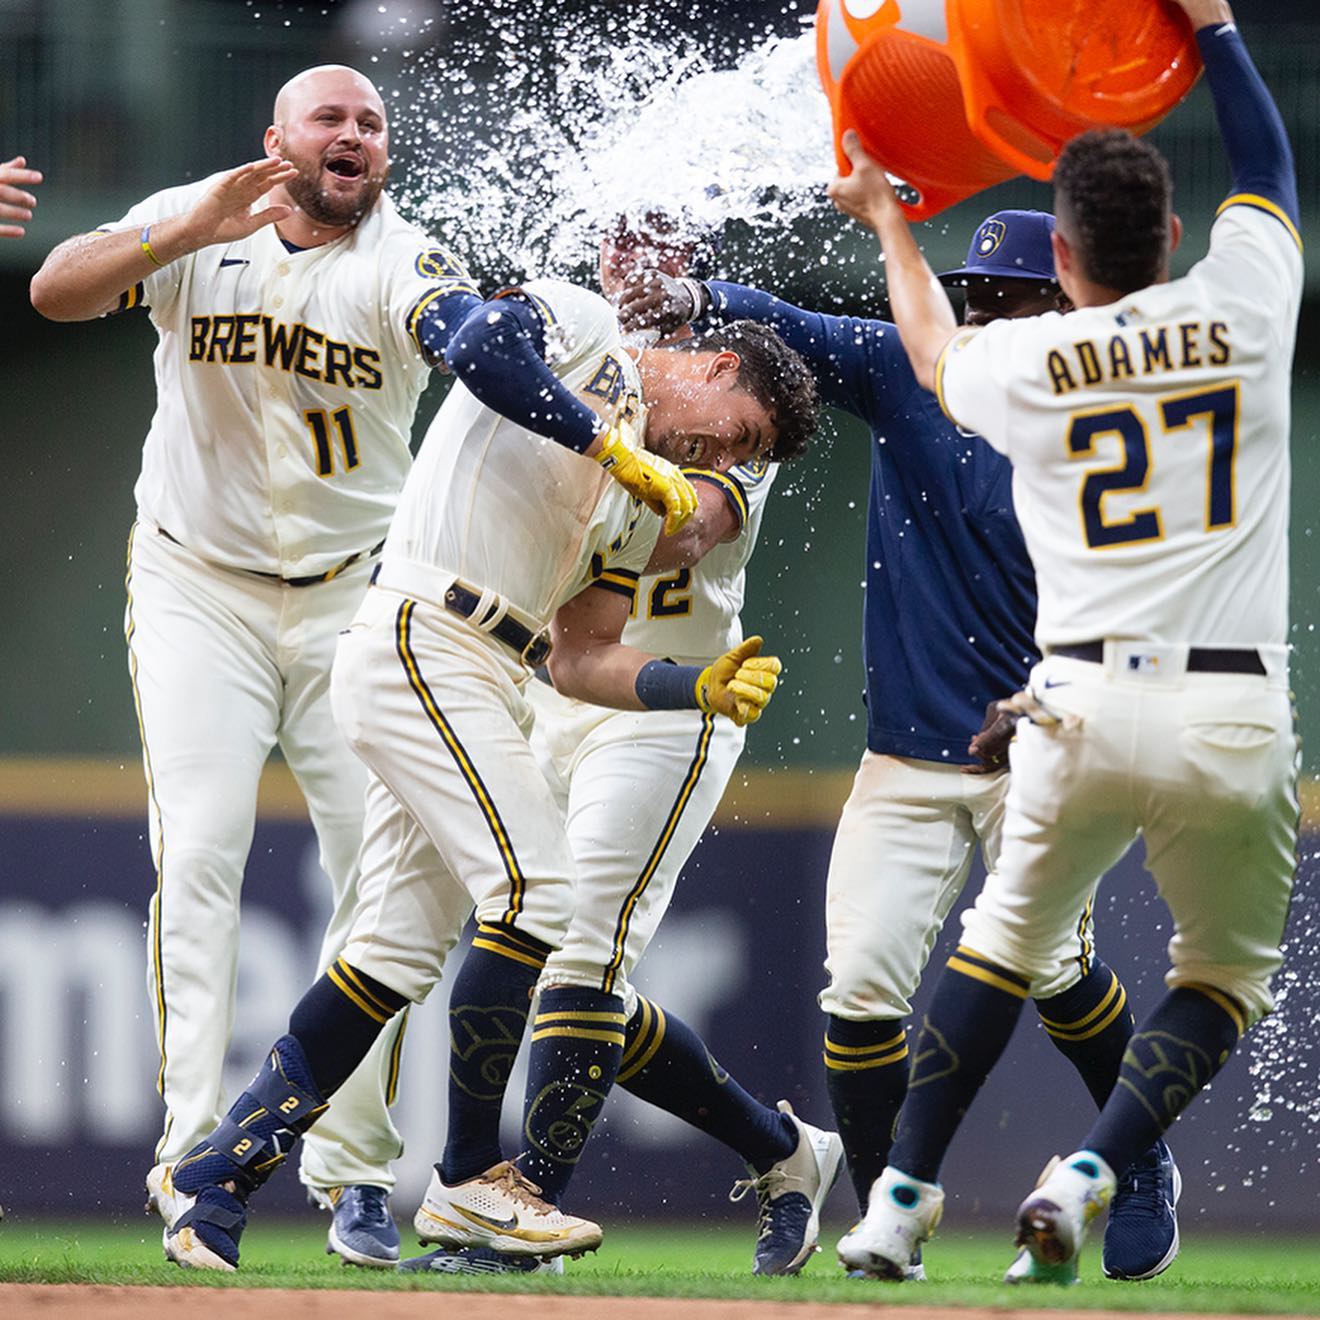 Just another walk-off for Wicho!  Urías clinched the win for the Crew after a ba...